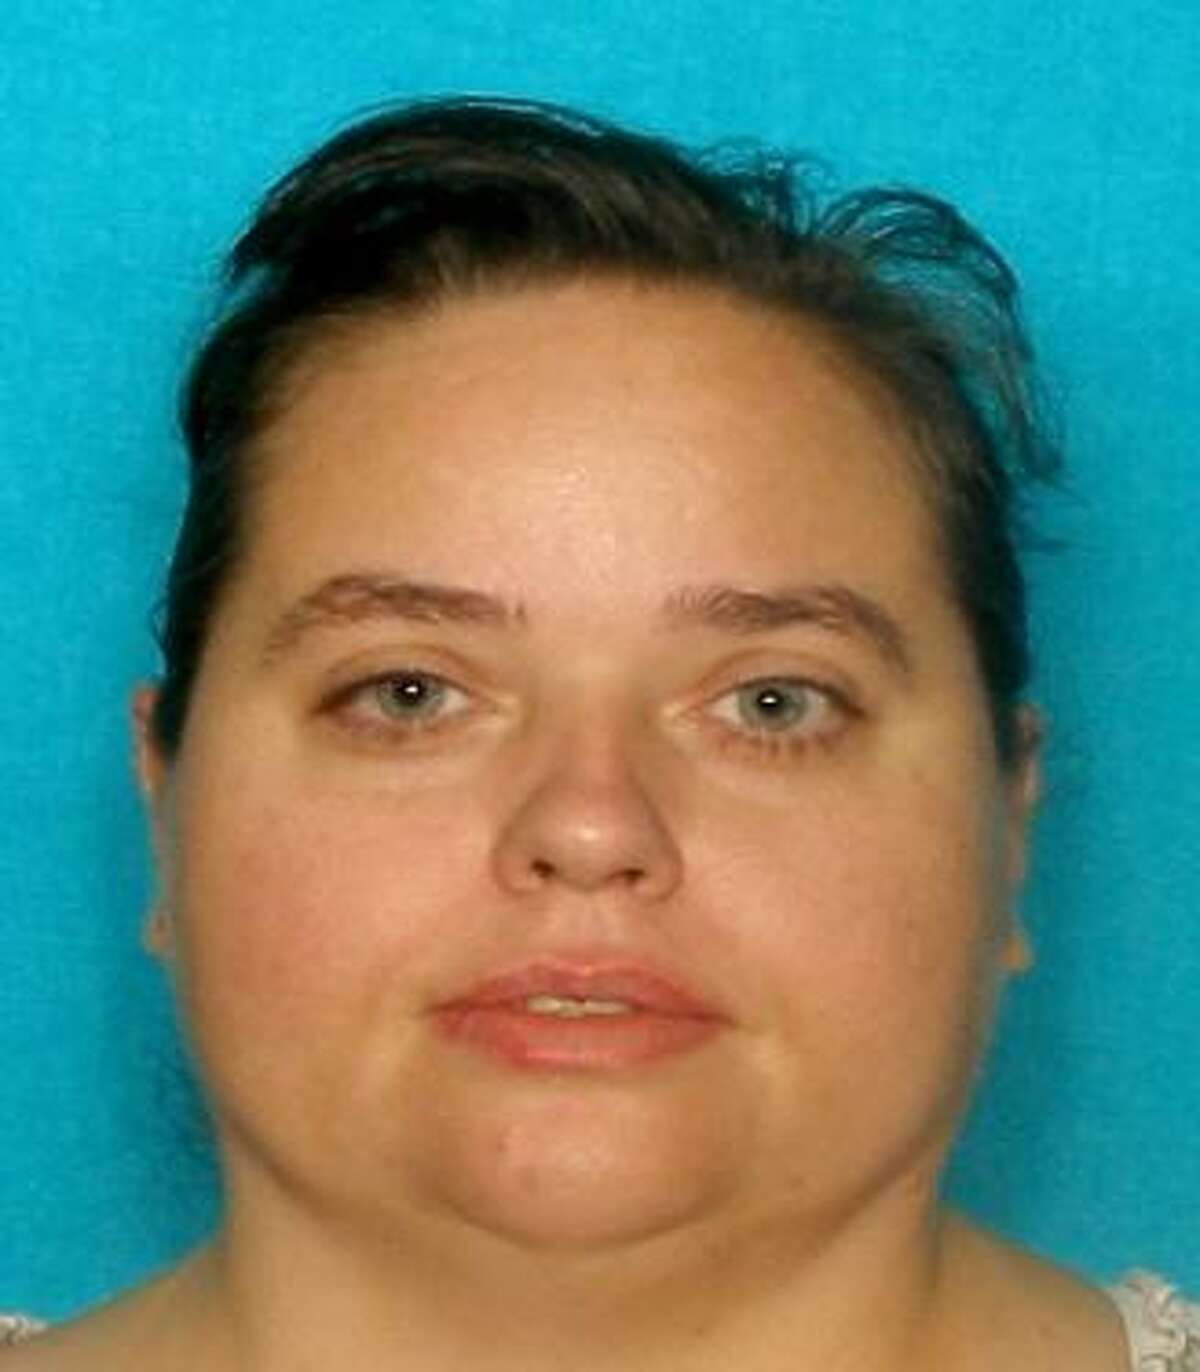 Jessica Marie Morales of Conroe is wanted on a charge of credit/debit card abuse. Her warrant is active as of Aug. 24, 2016.